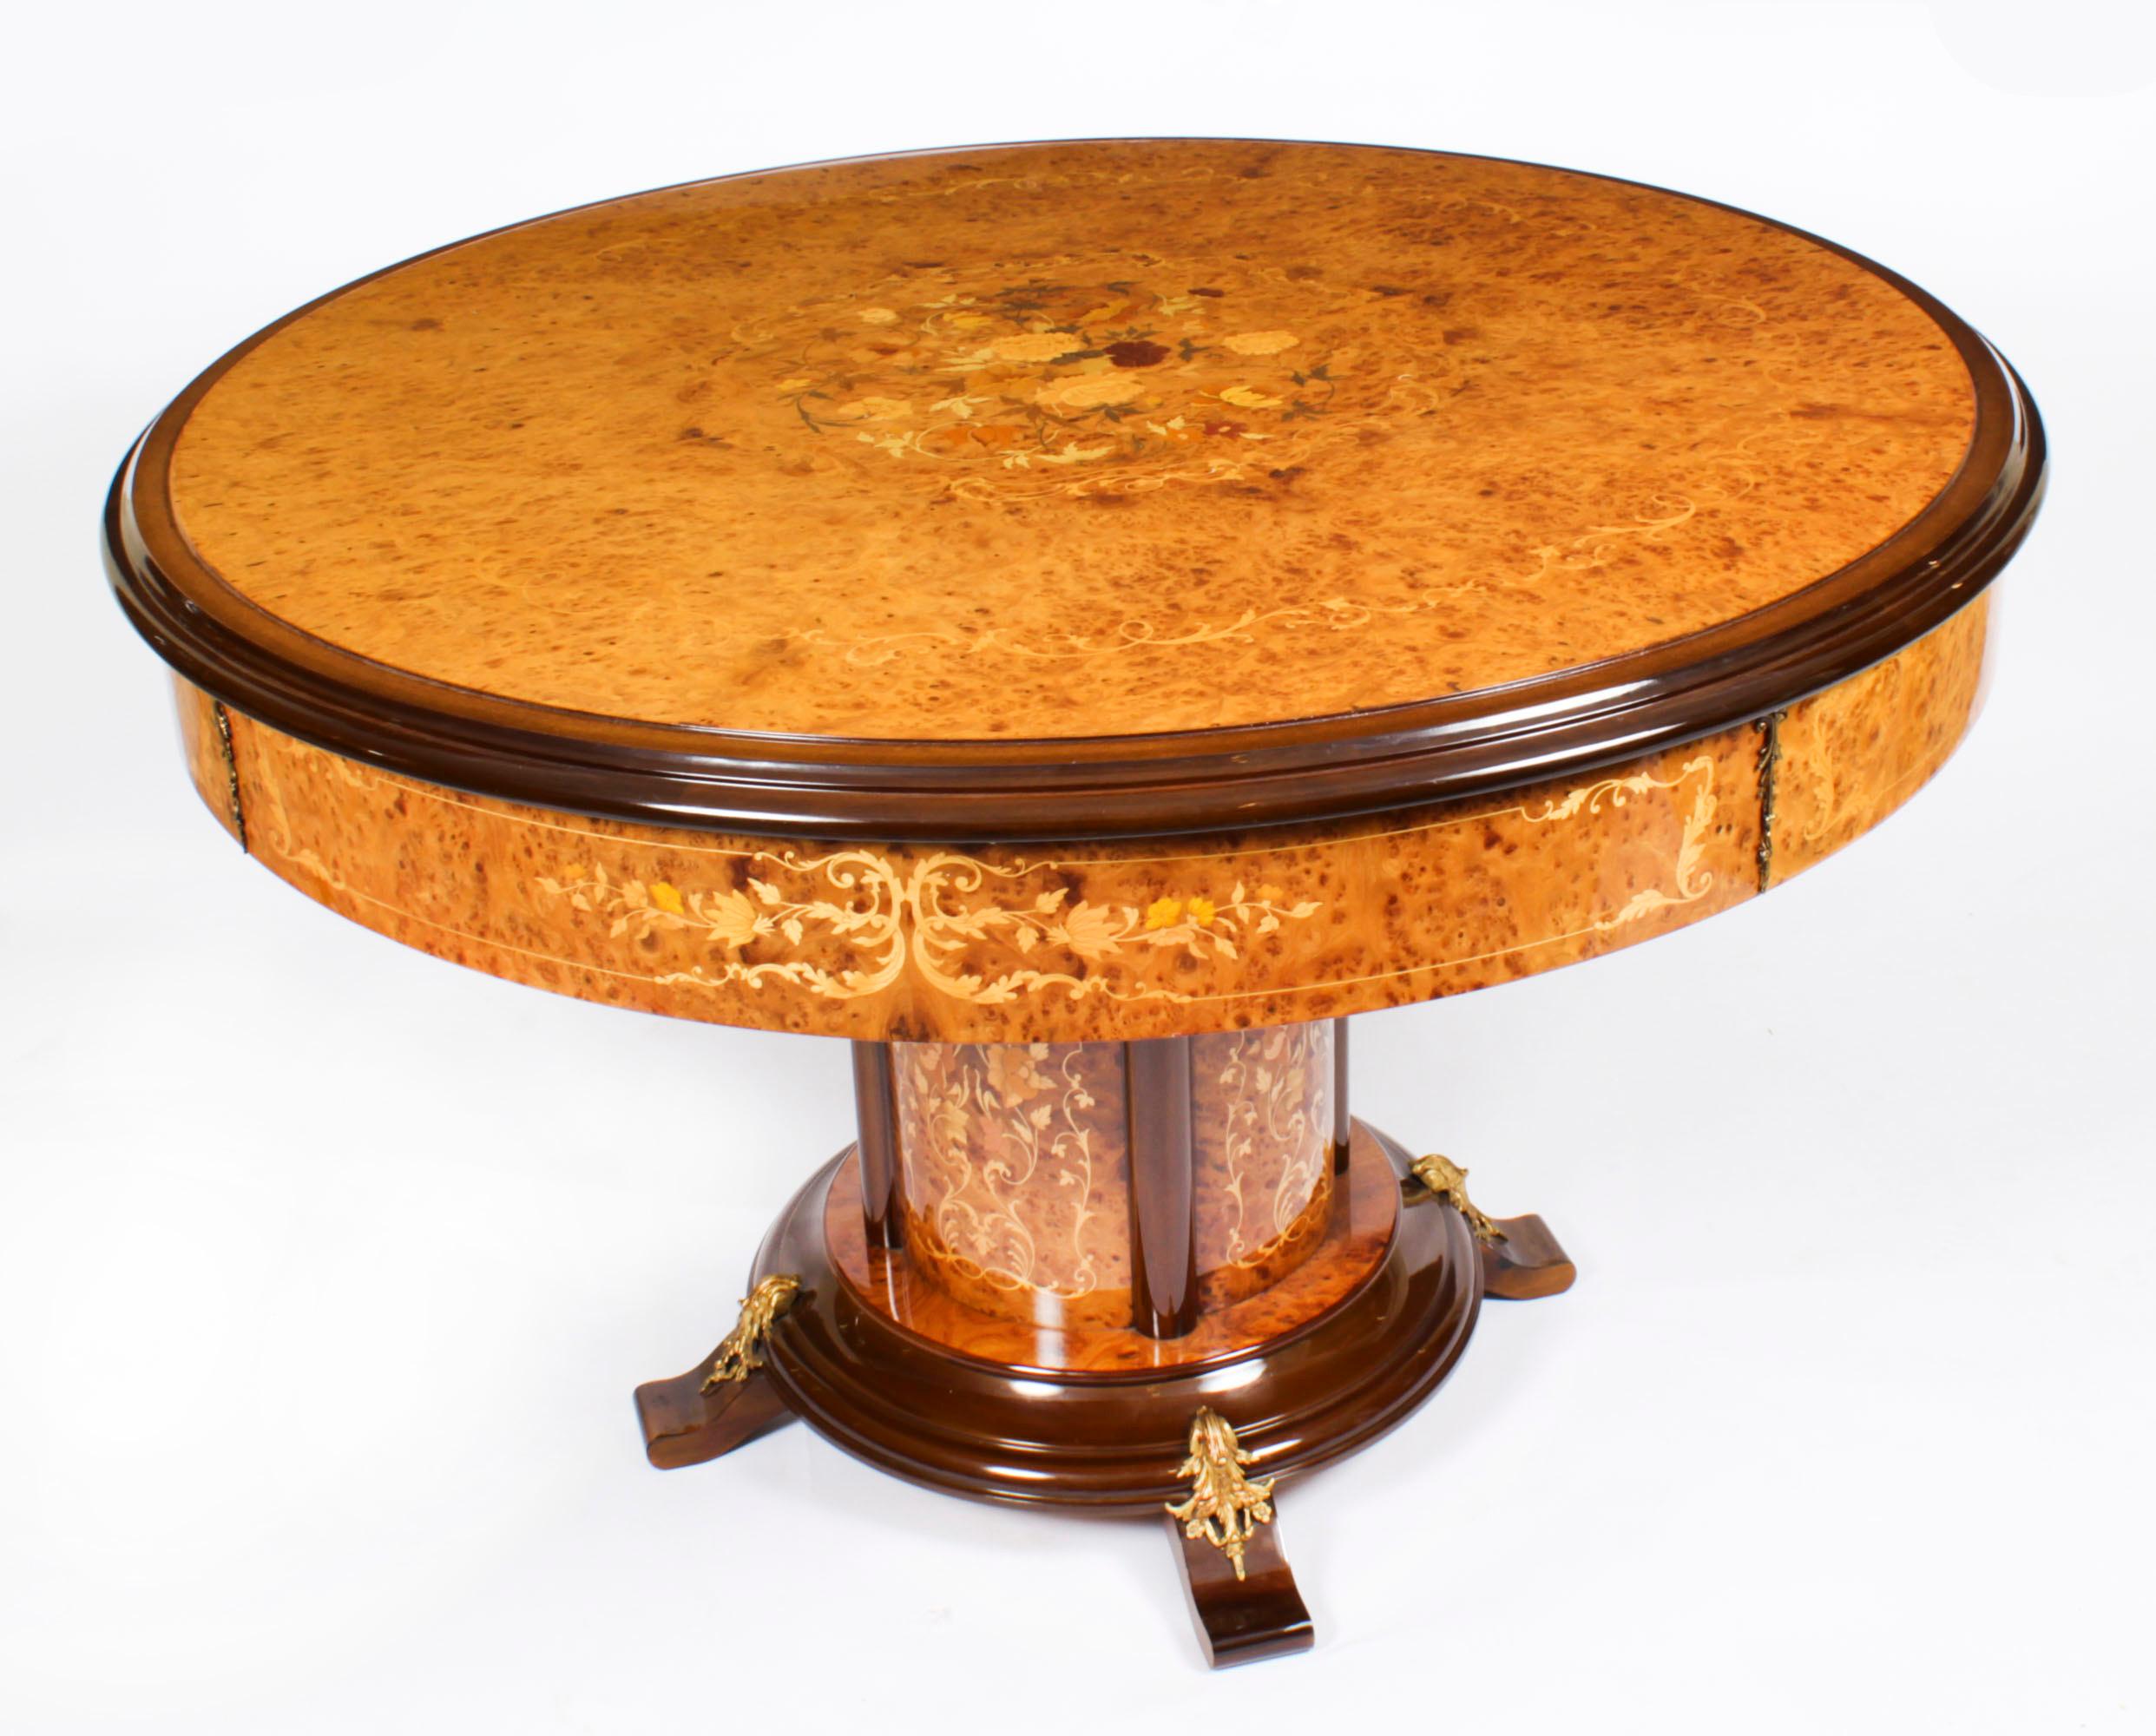 This is a fabulous high quality vintage Italian burr walnut, floral marquetry and ormolu inlaid metamorphic triple top games table for roulette, cards, chess, draughts, backgammon and blackjack. mid 20th century in date.

The lift-off top flips